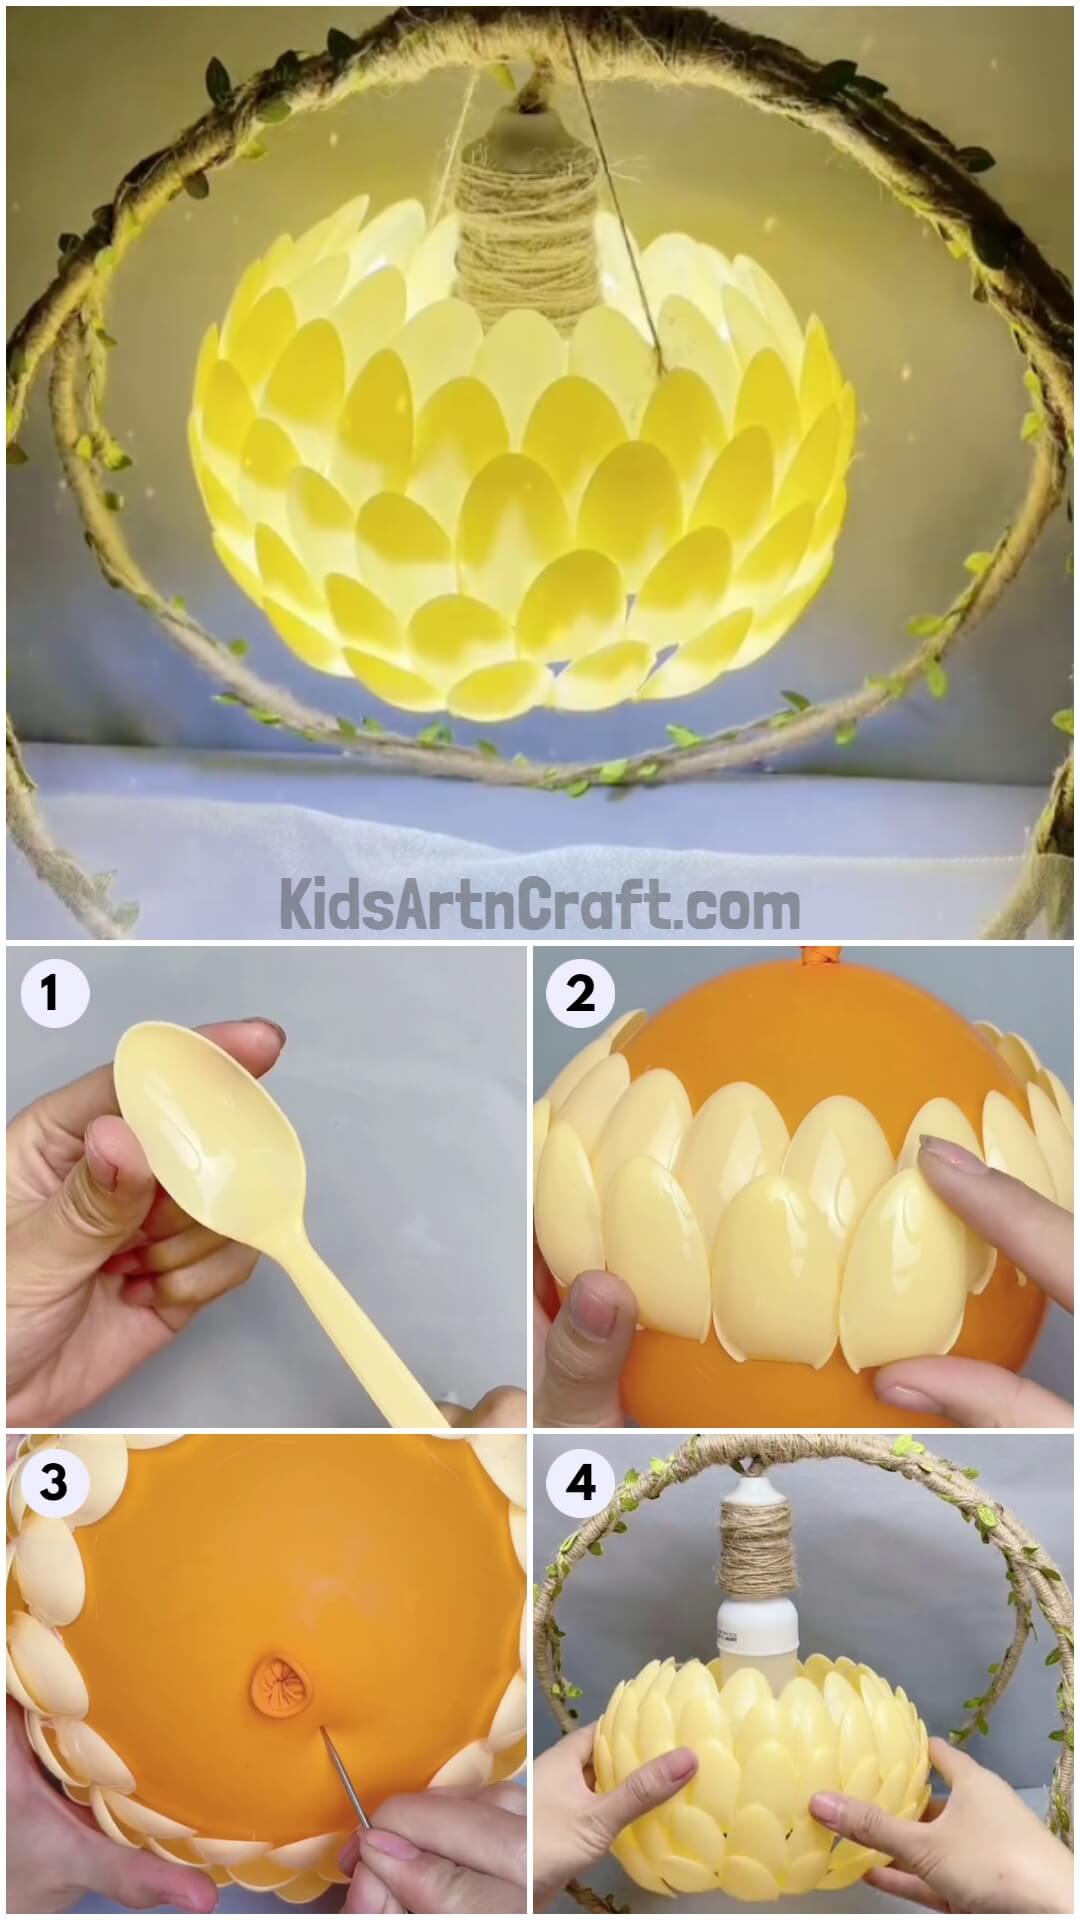 How to make Plastic Spoon Lamp Step-by-Step Tutorial